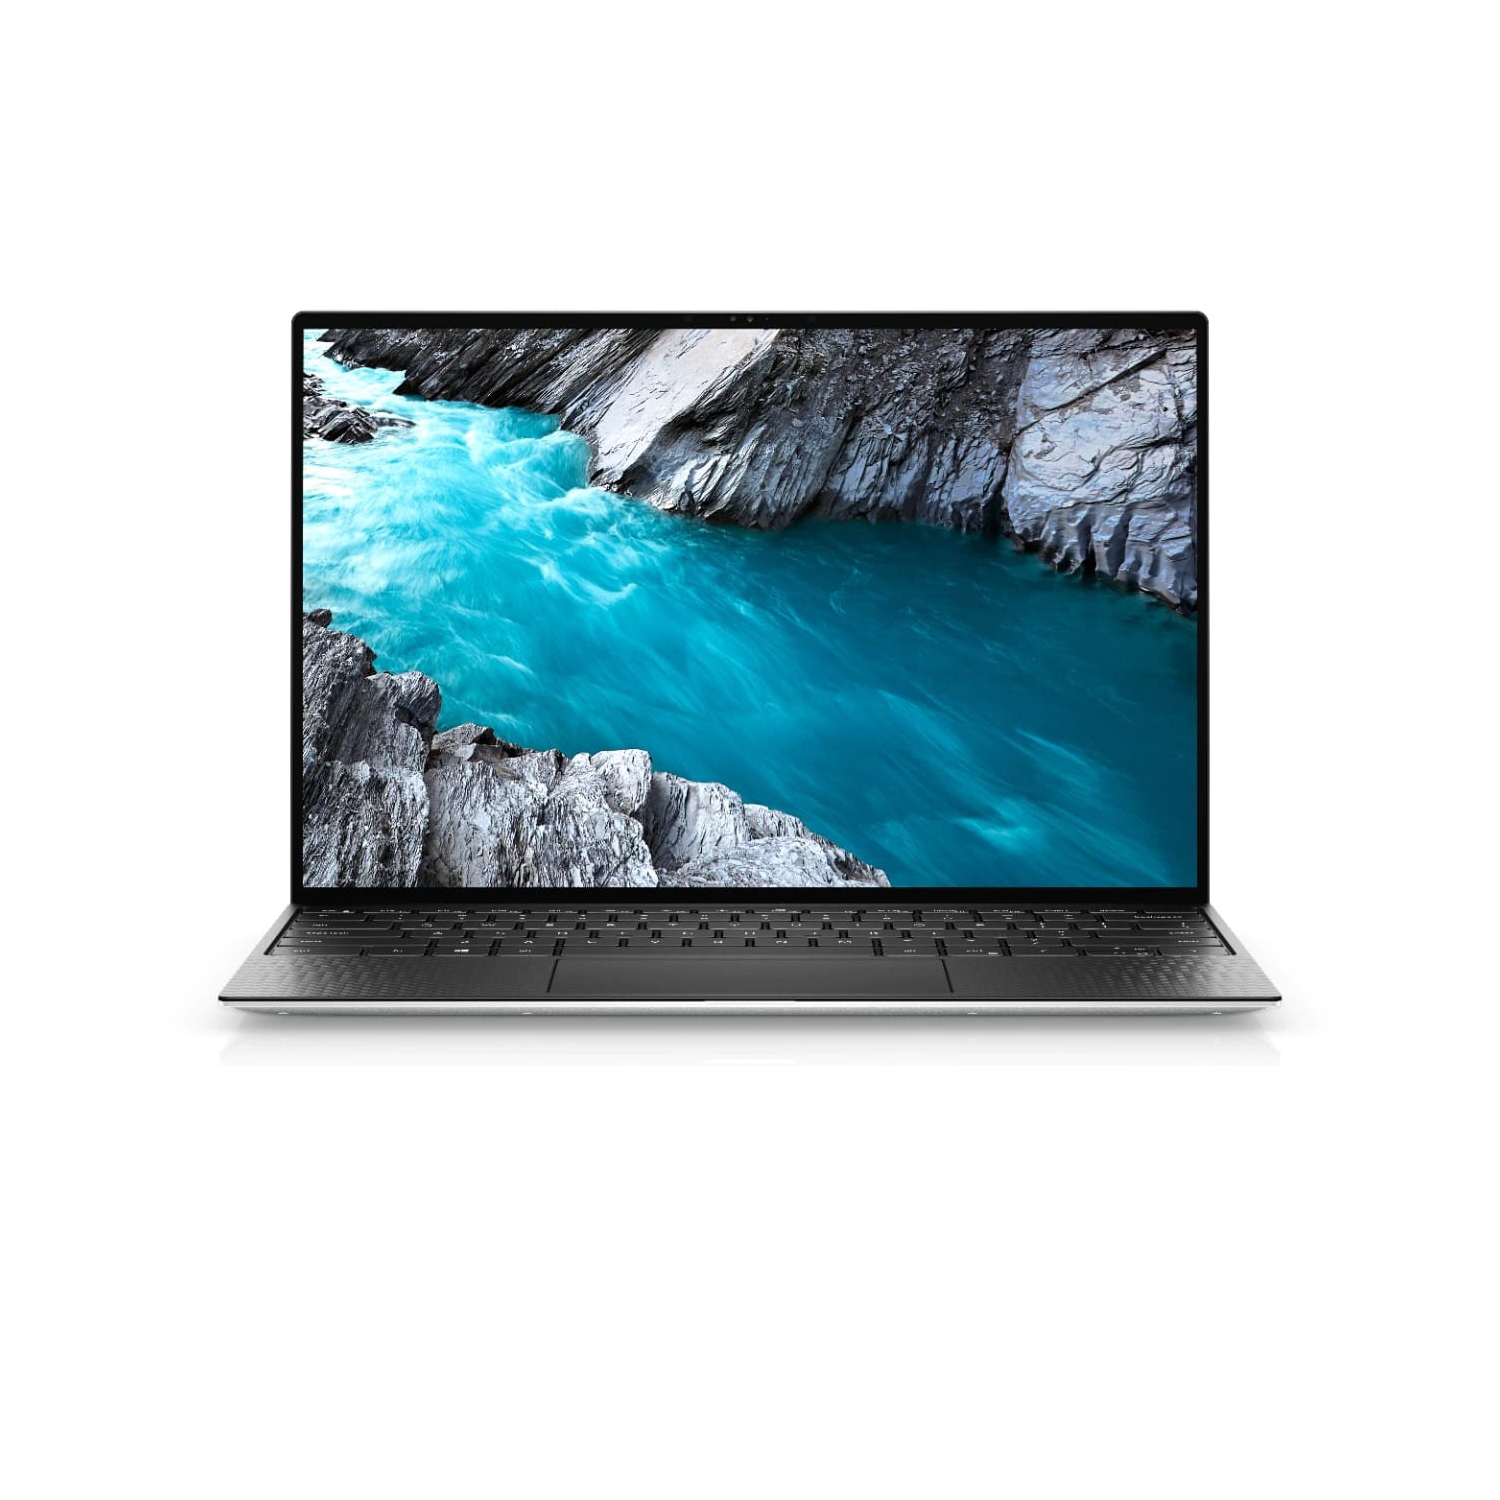 Refurbished (Excellent) - Dell XPS 13 9300 Laptop (2020) | 13.3" FHD+ Touch | Core i5 - 256GB SSD - 8GB RAM | 4 Cores @ 3.6 GHz - 10th Gen CPU Certified Refurbished